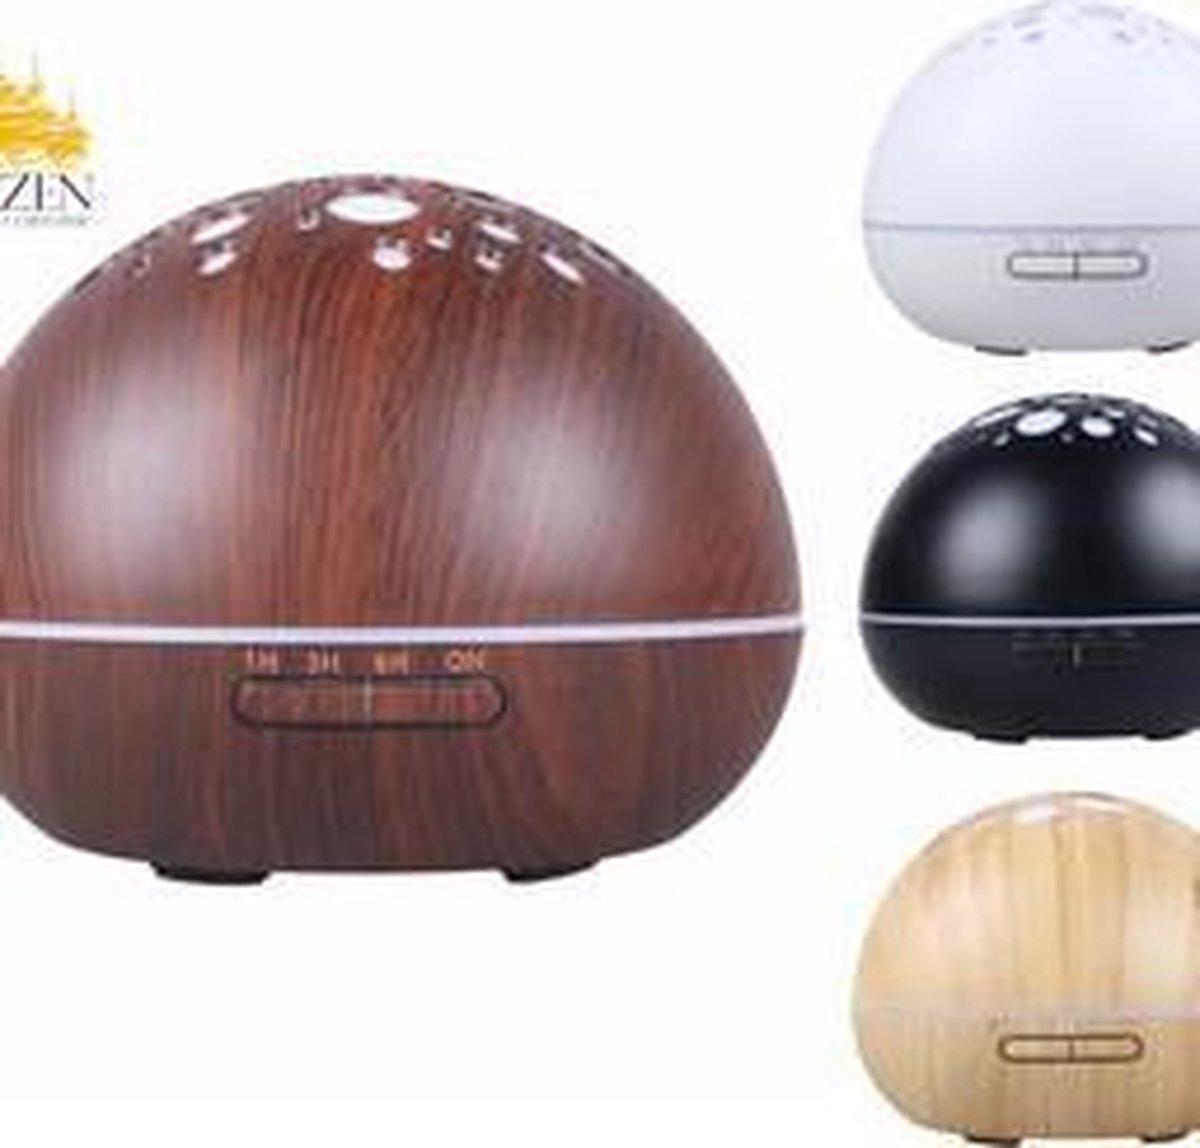 GX-aroma diffuser Starry night (grote capaciteit) Donker hout motief + 12 geurenset